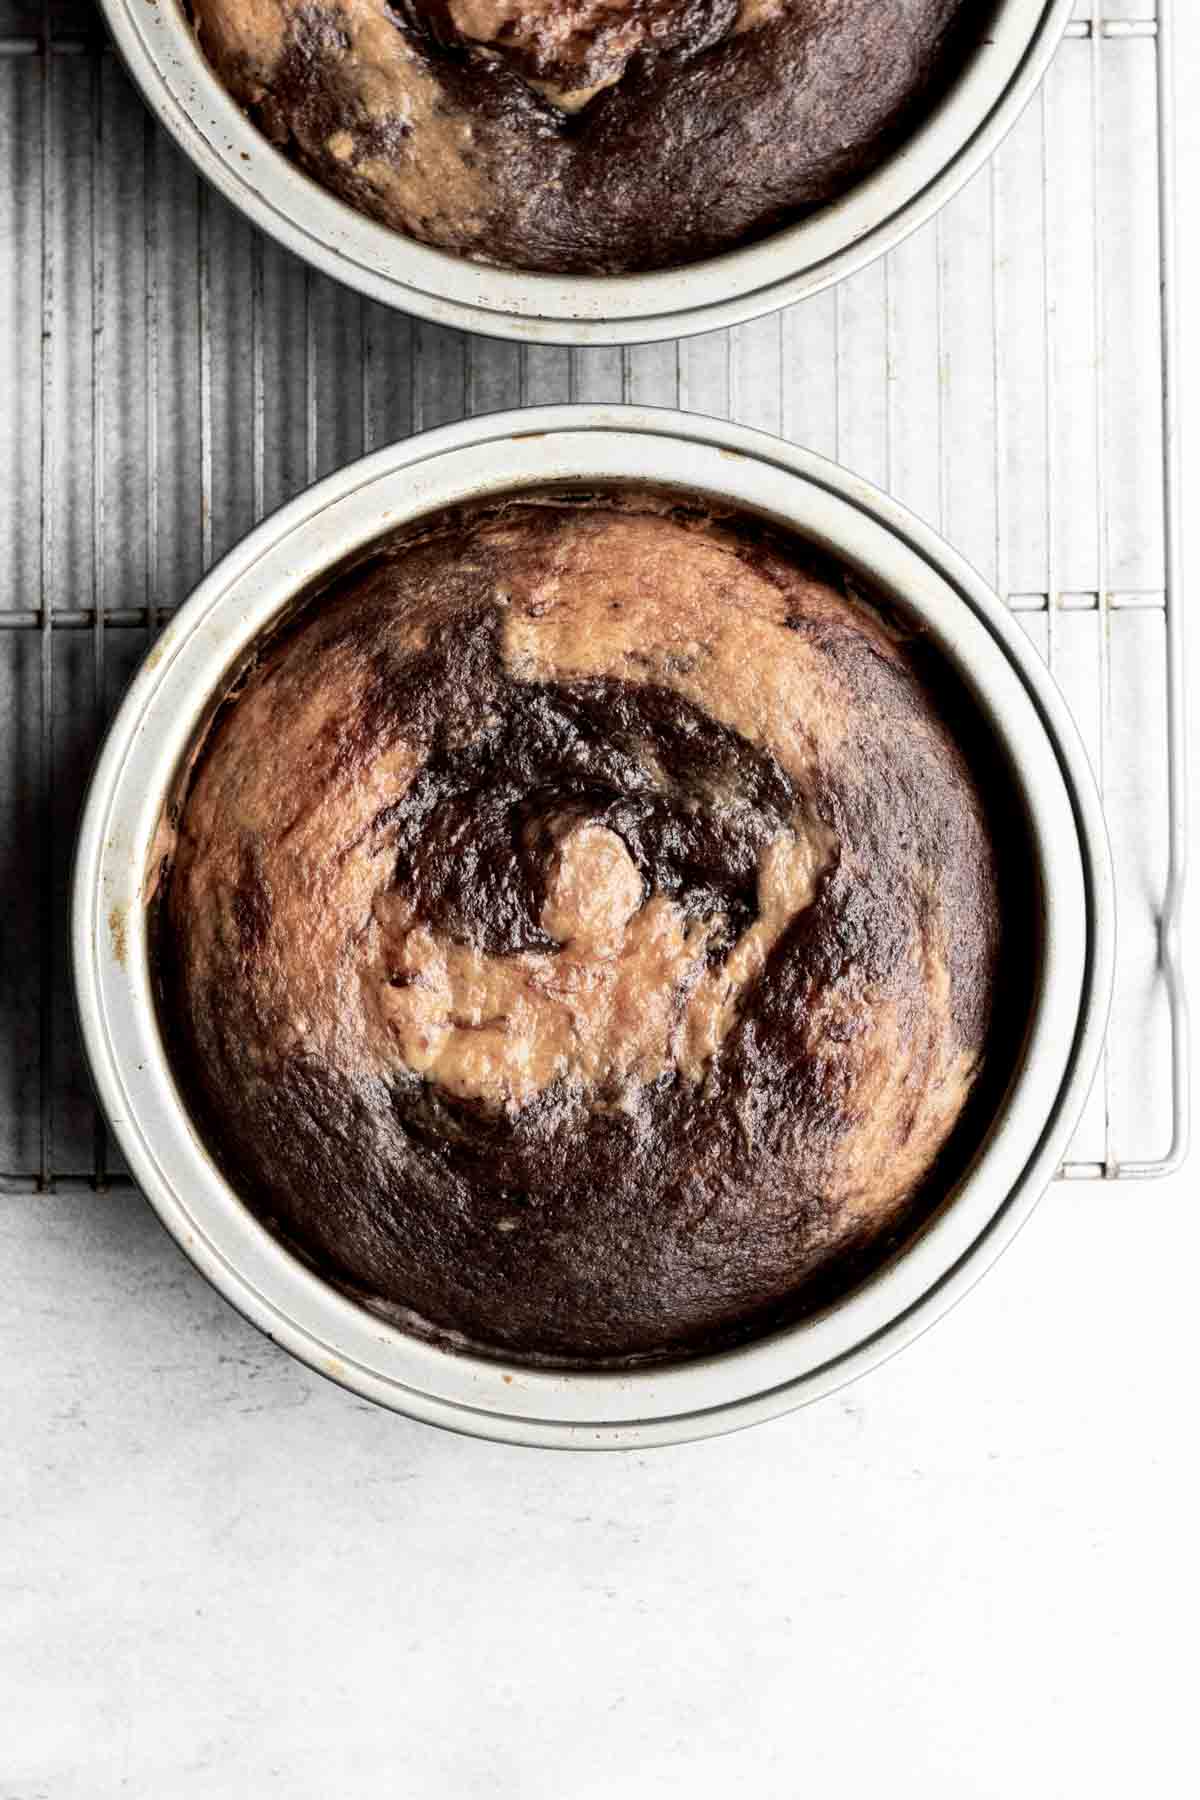 Marble cake risen from the oven in tins.